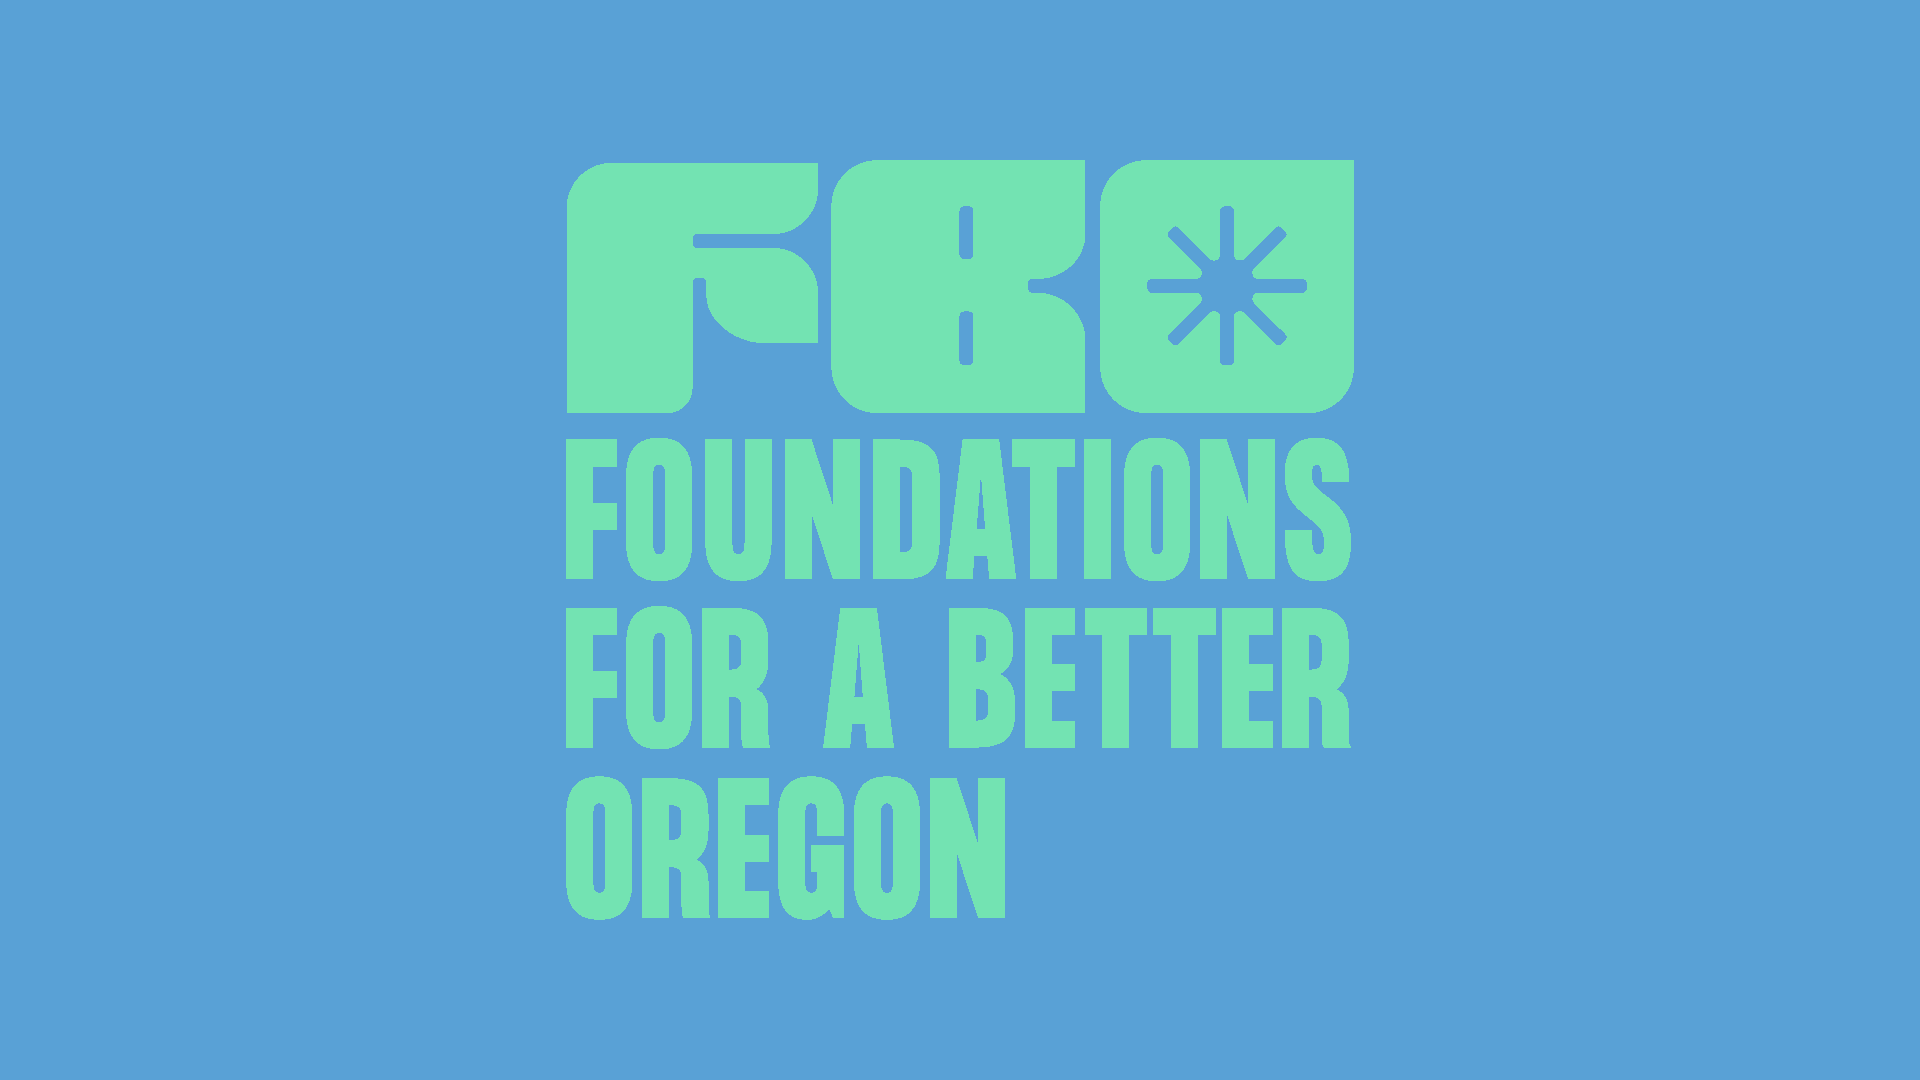 Our new brand identity at Foundations for a Better Oregon.